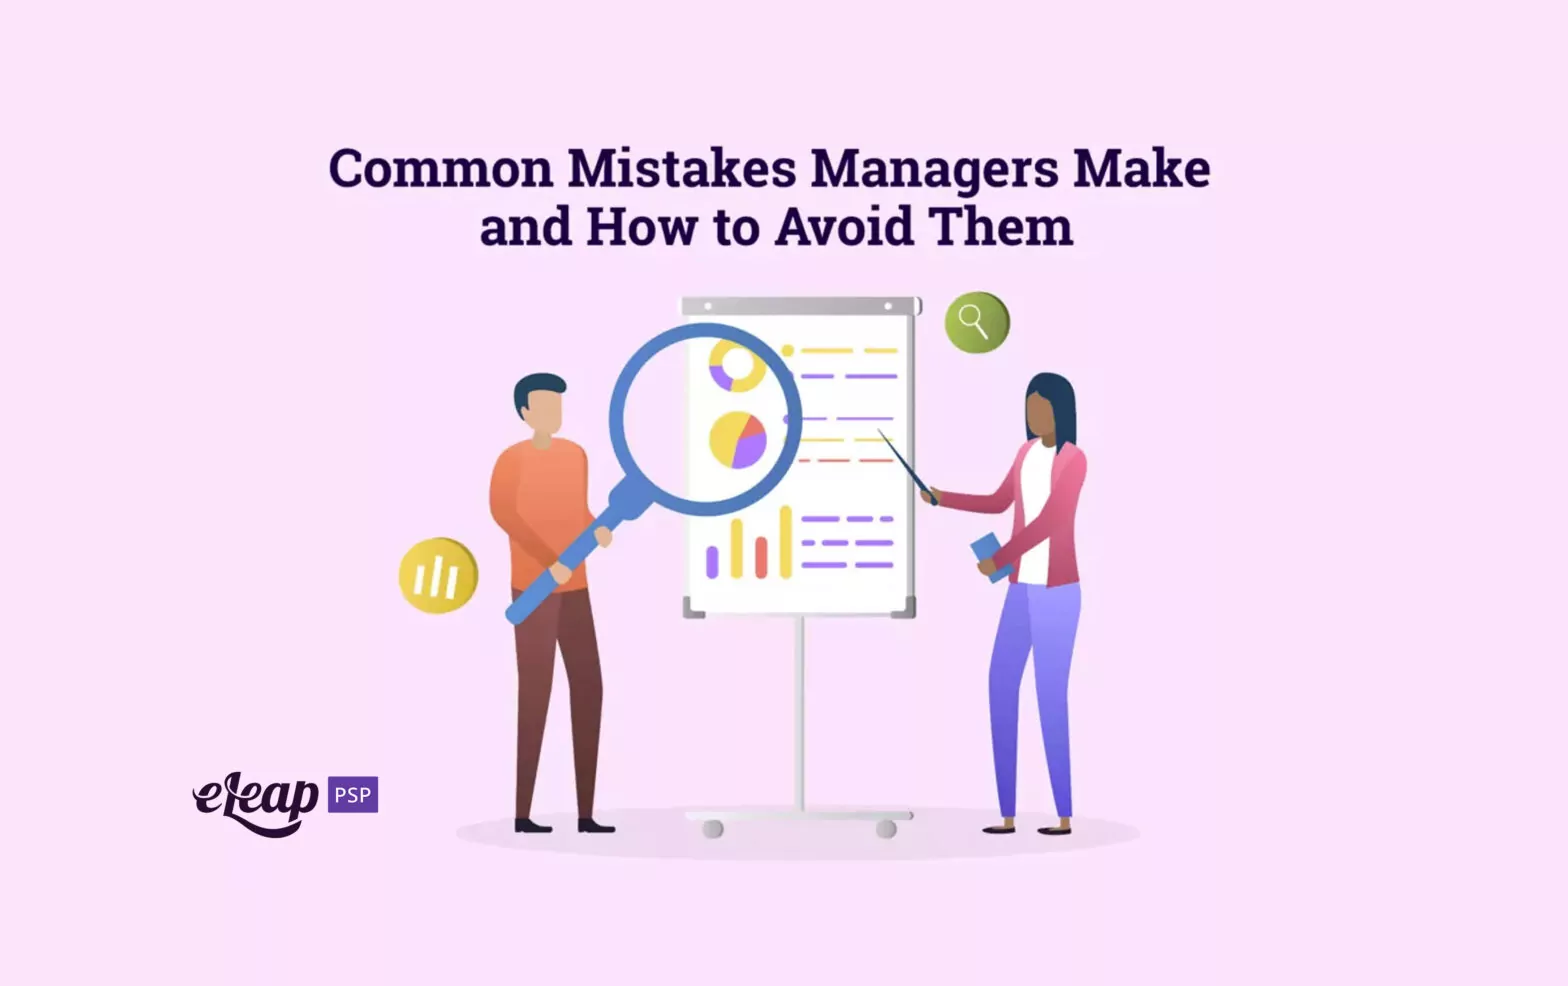 Common Mistakes Managers Make and How to Avoid Them